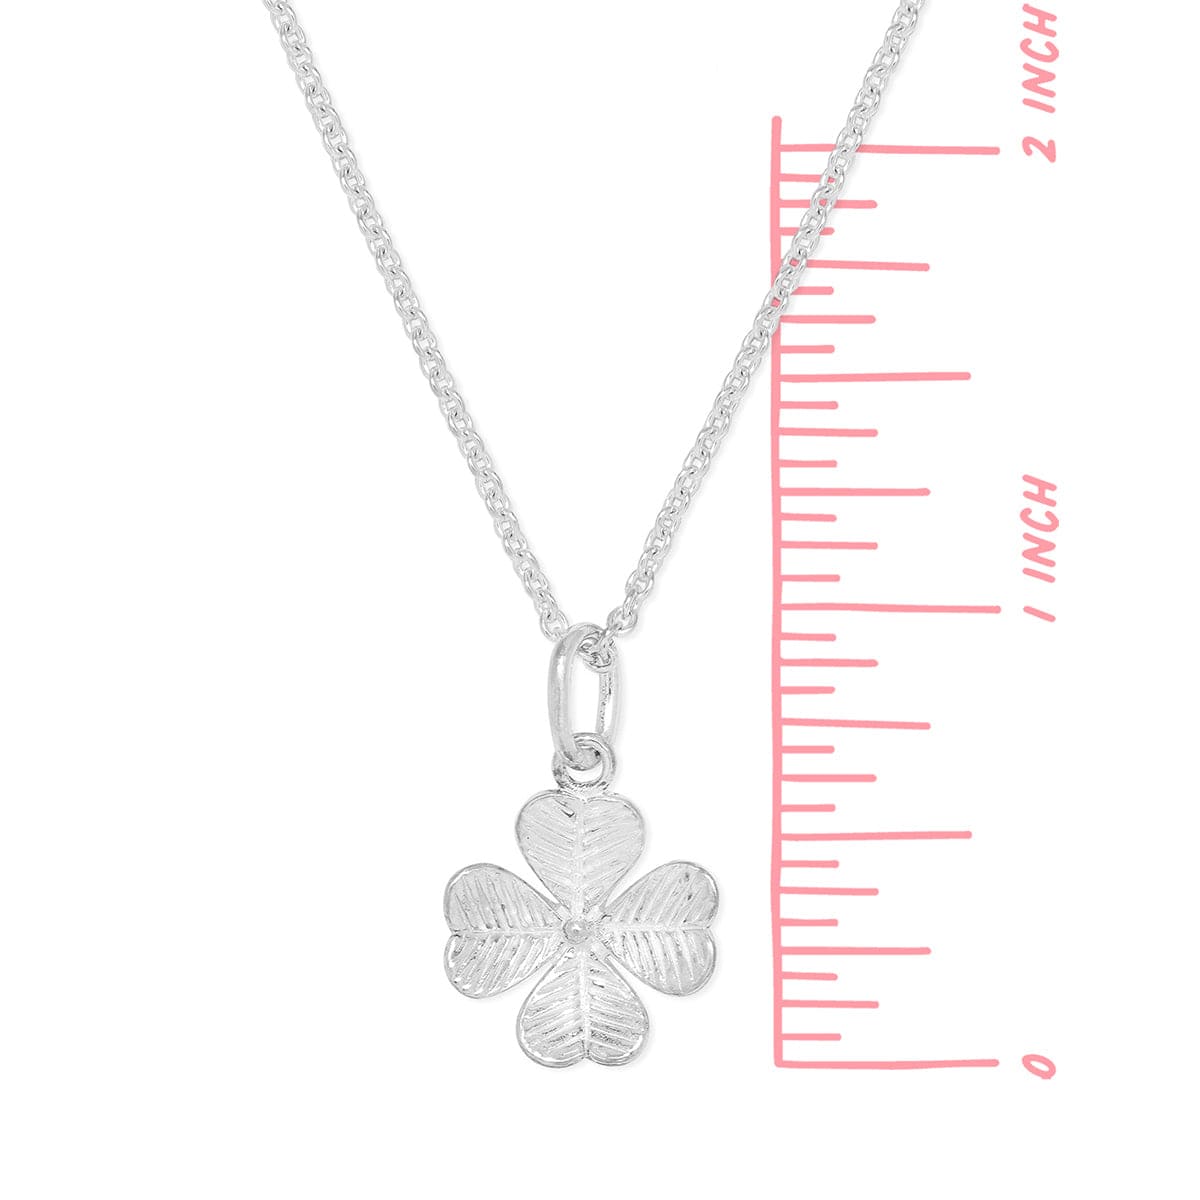 Boma Jewelry Necklaces Four Leaf Clover Necklace